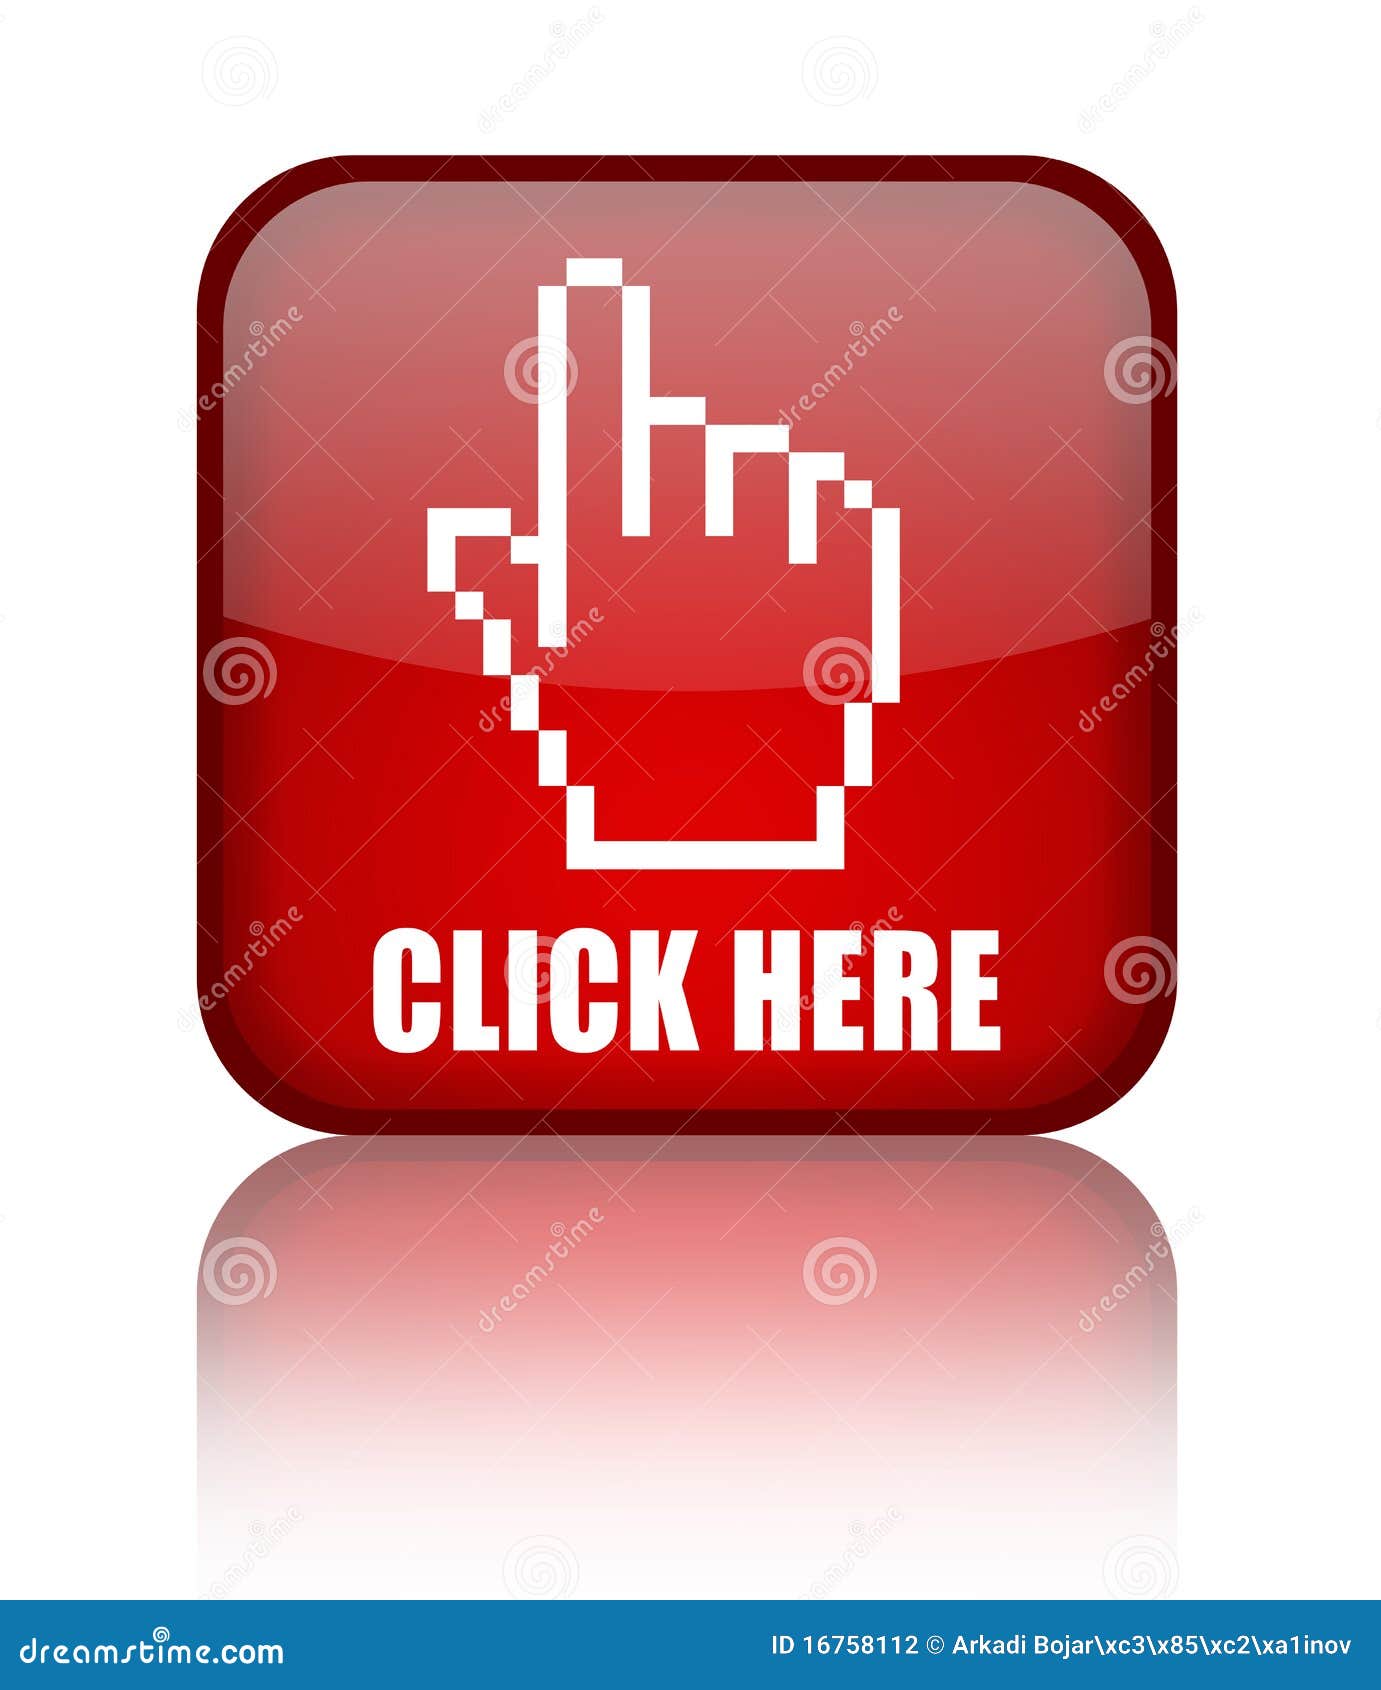 Click here button stock vector. Illustration of clickable - 16758112